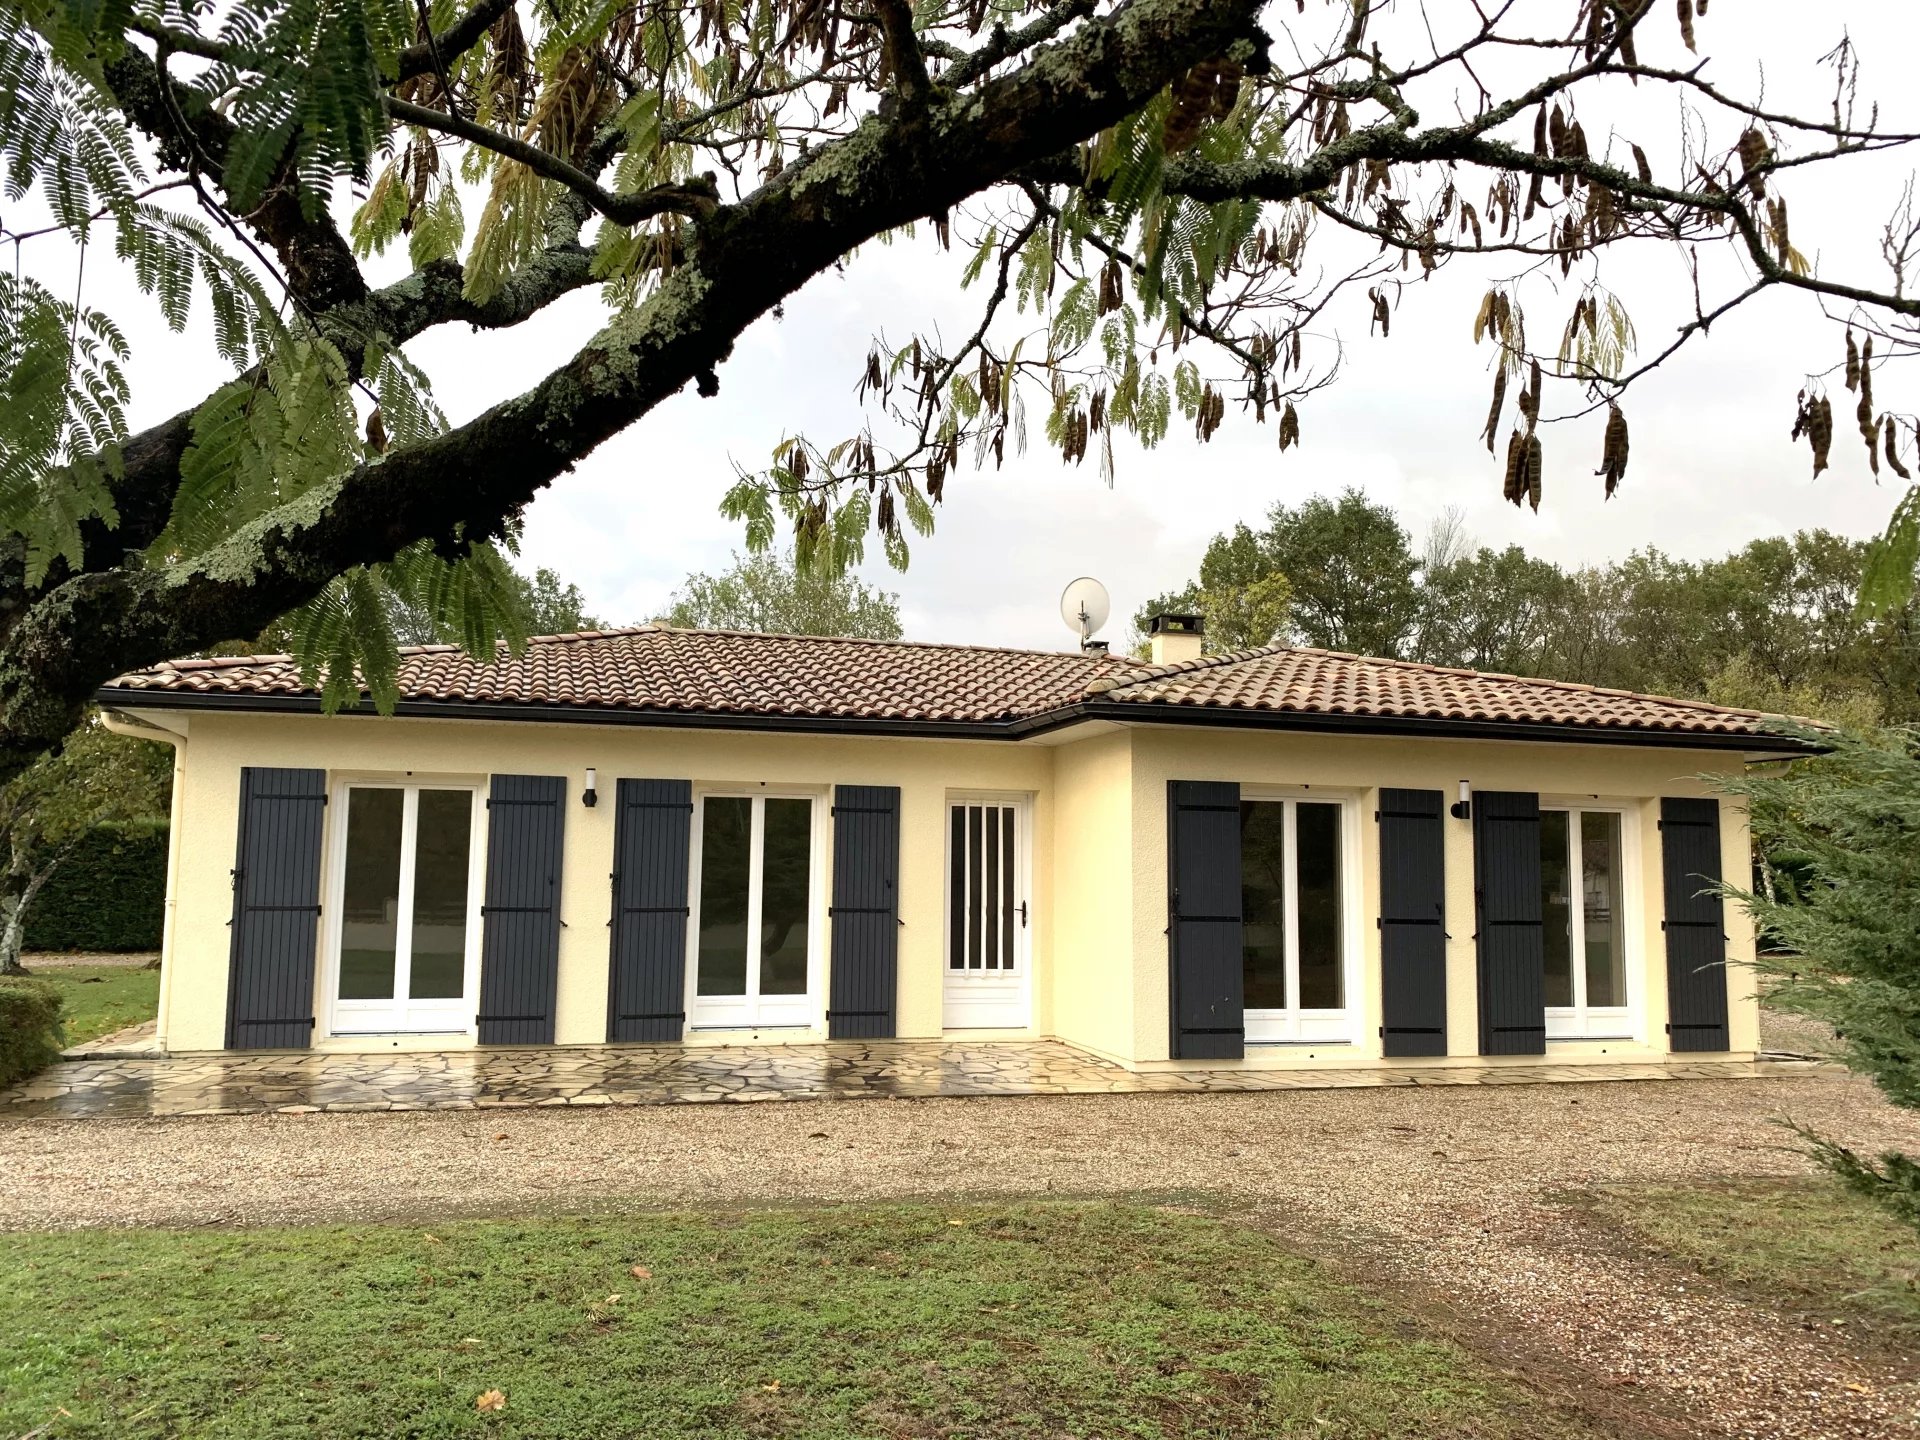 Bungalow, 3 bedrooms, over 3000m² of land, less than an hour from Bordeaux